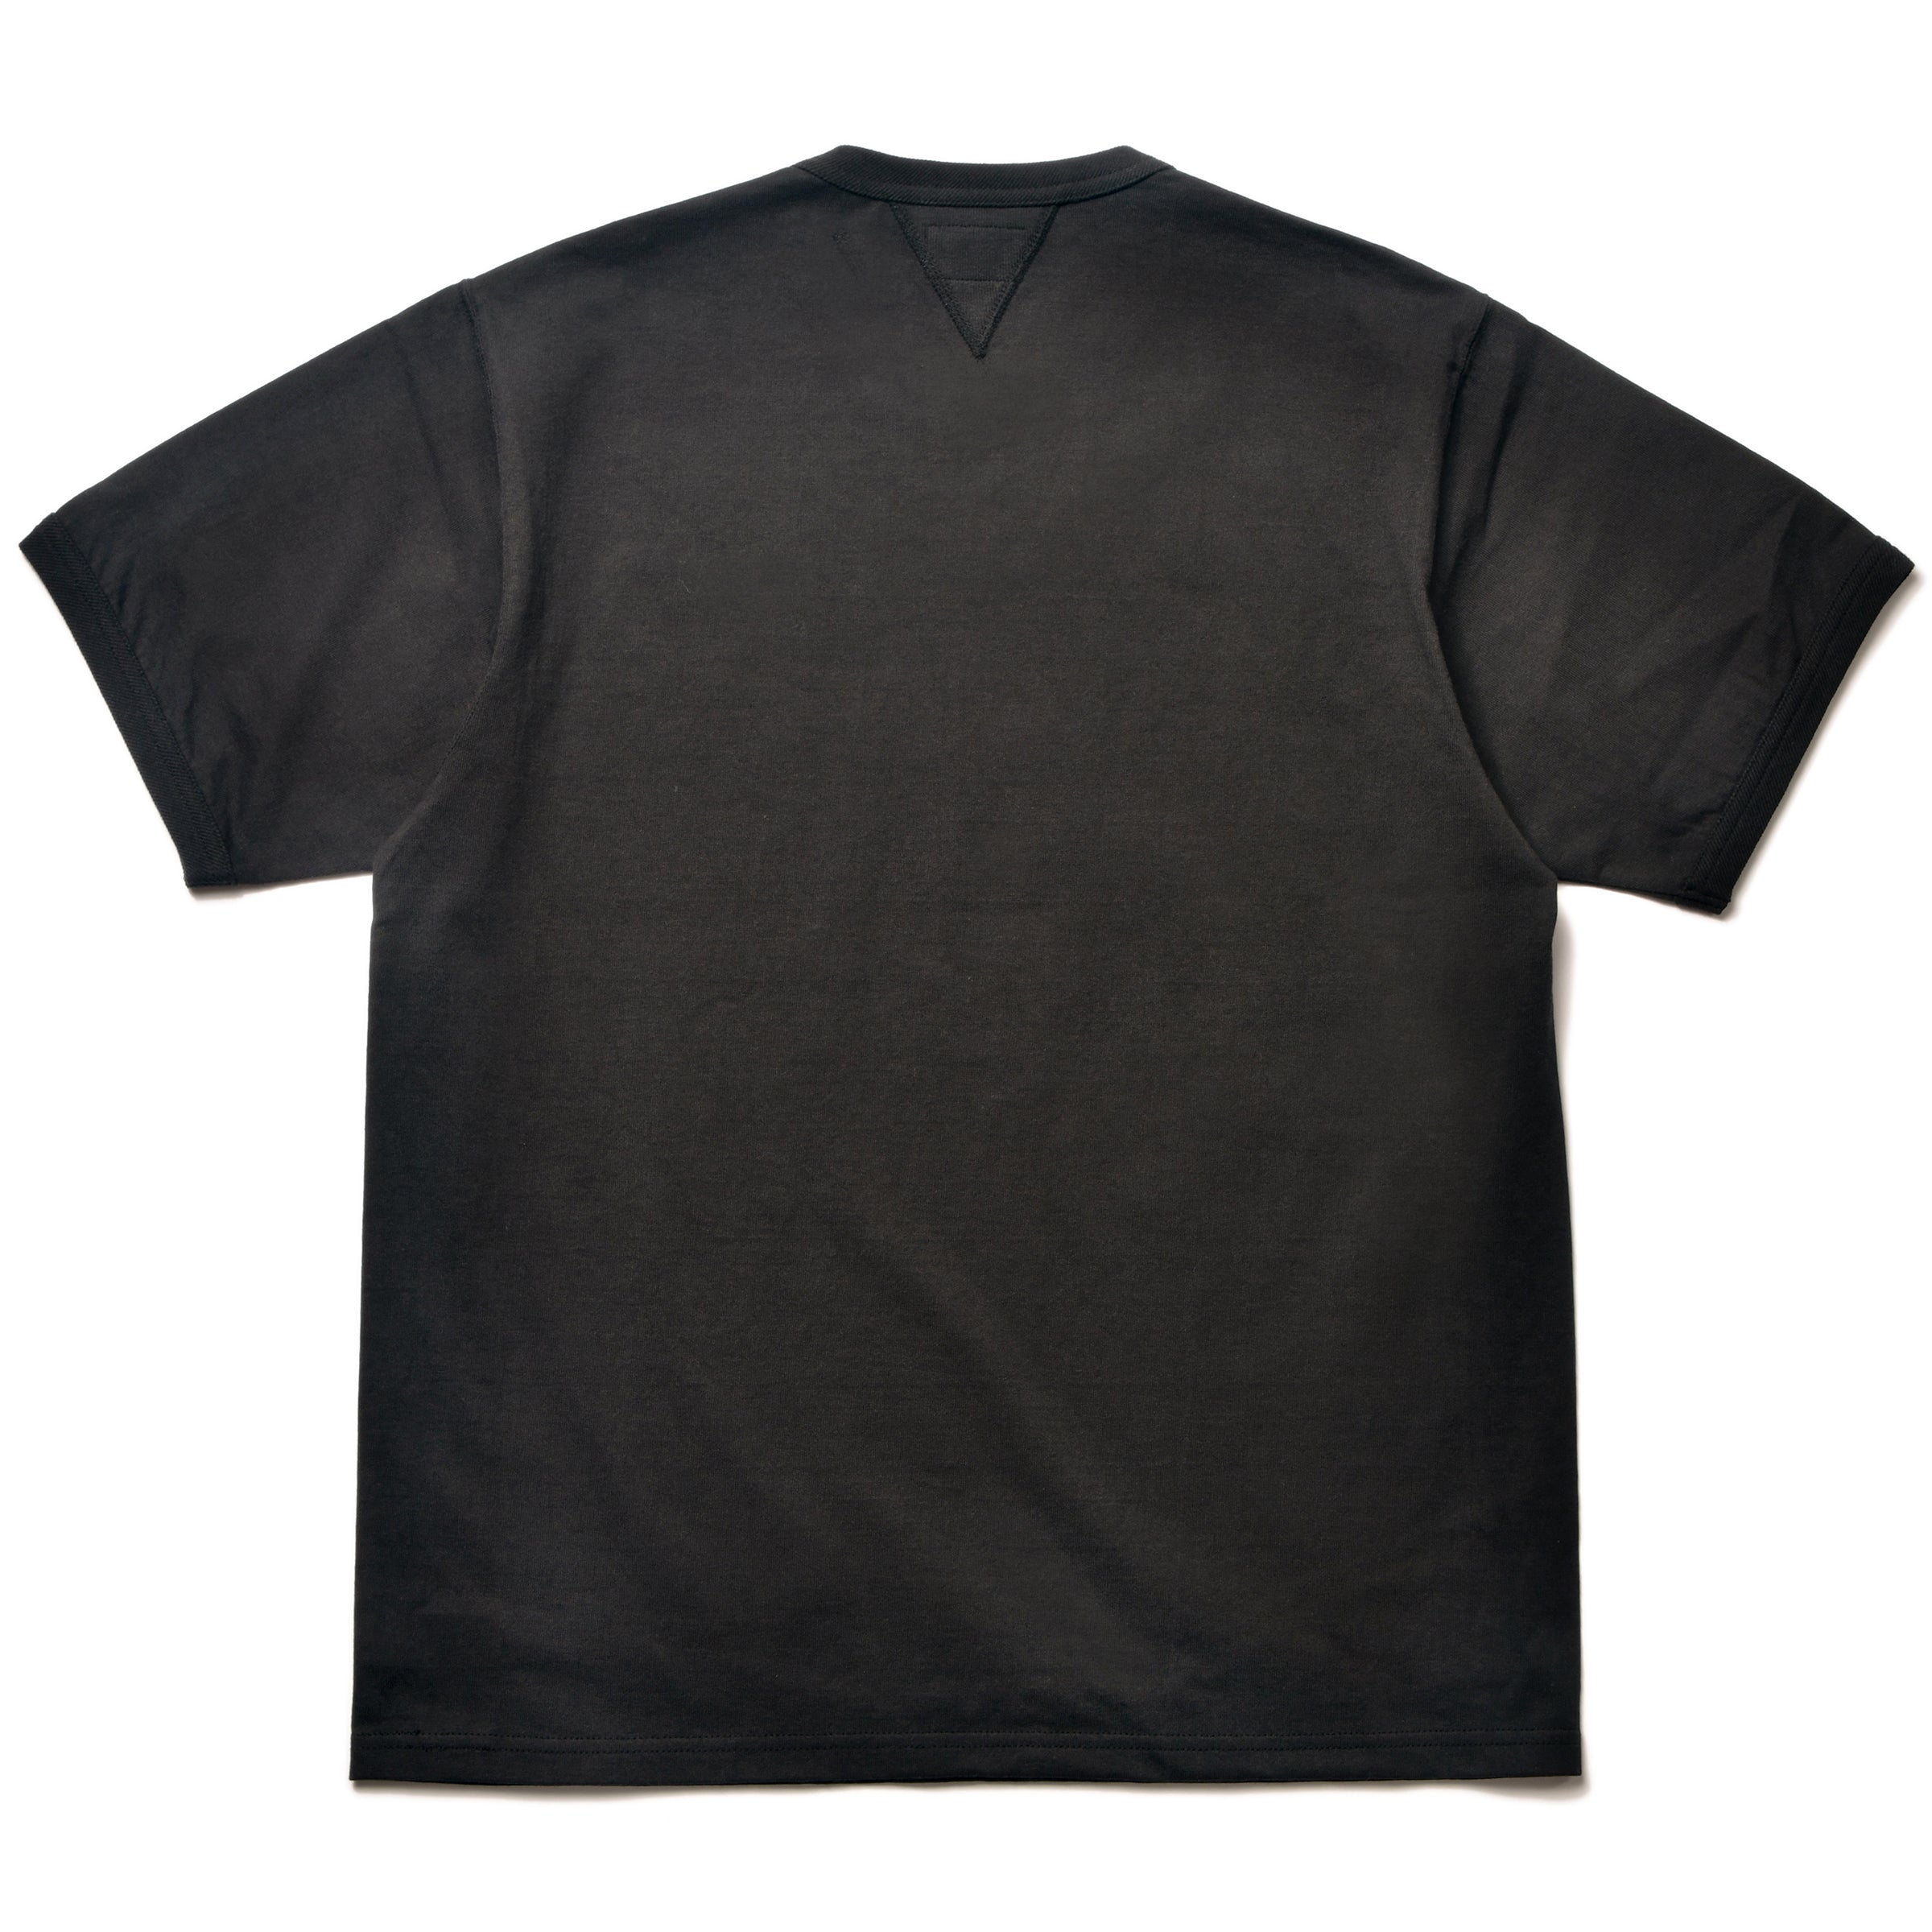 GUSSET T-SHIRT – The Real McCoy's